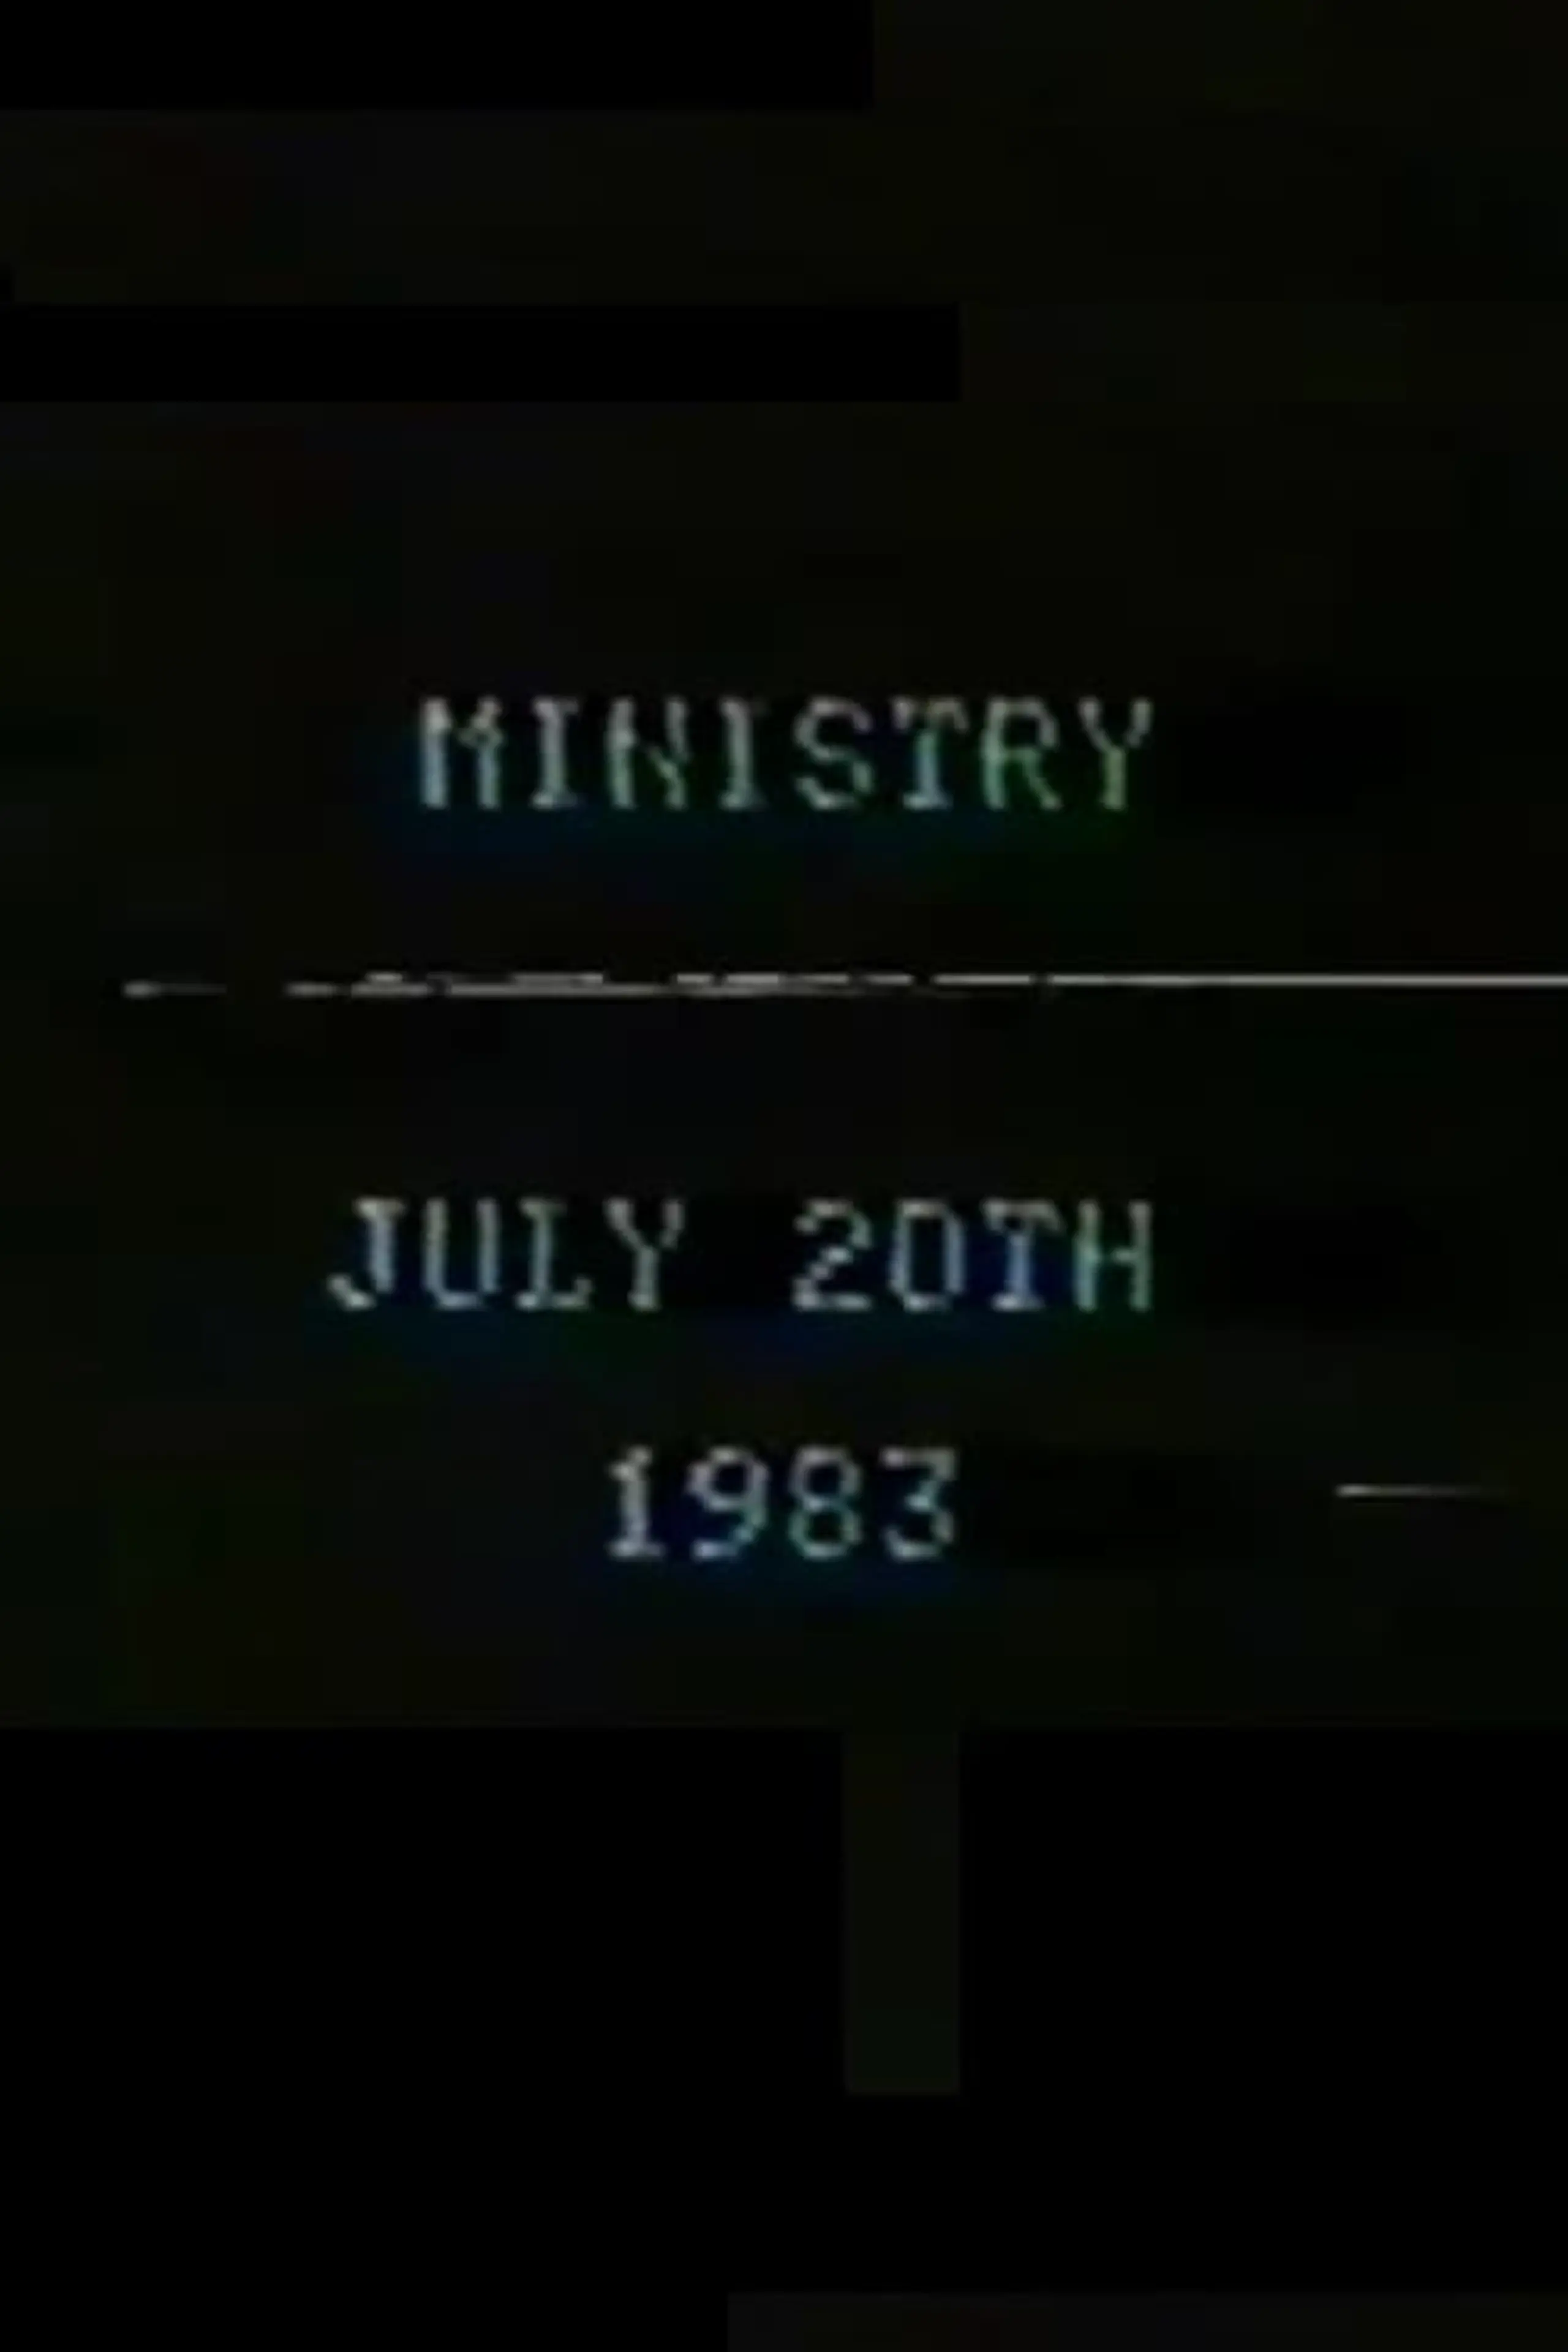 Ministry July 20th, 1983